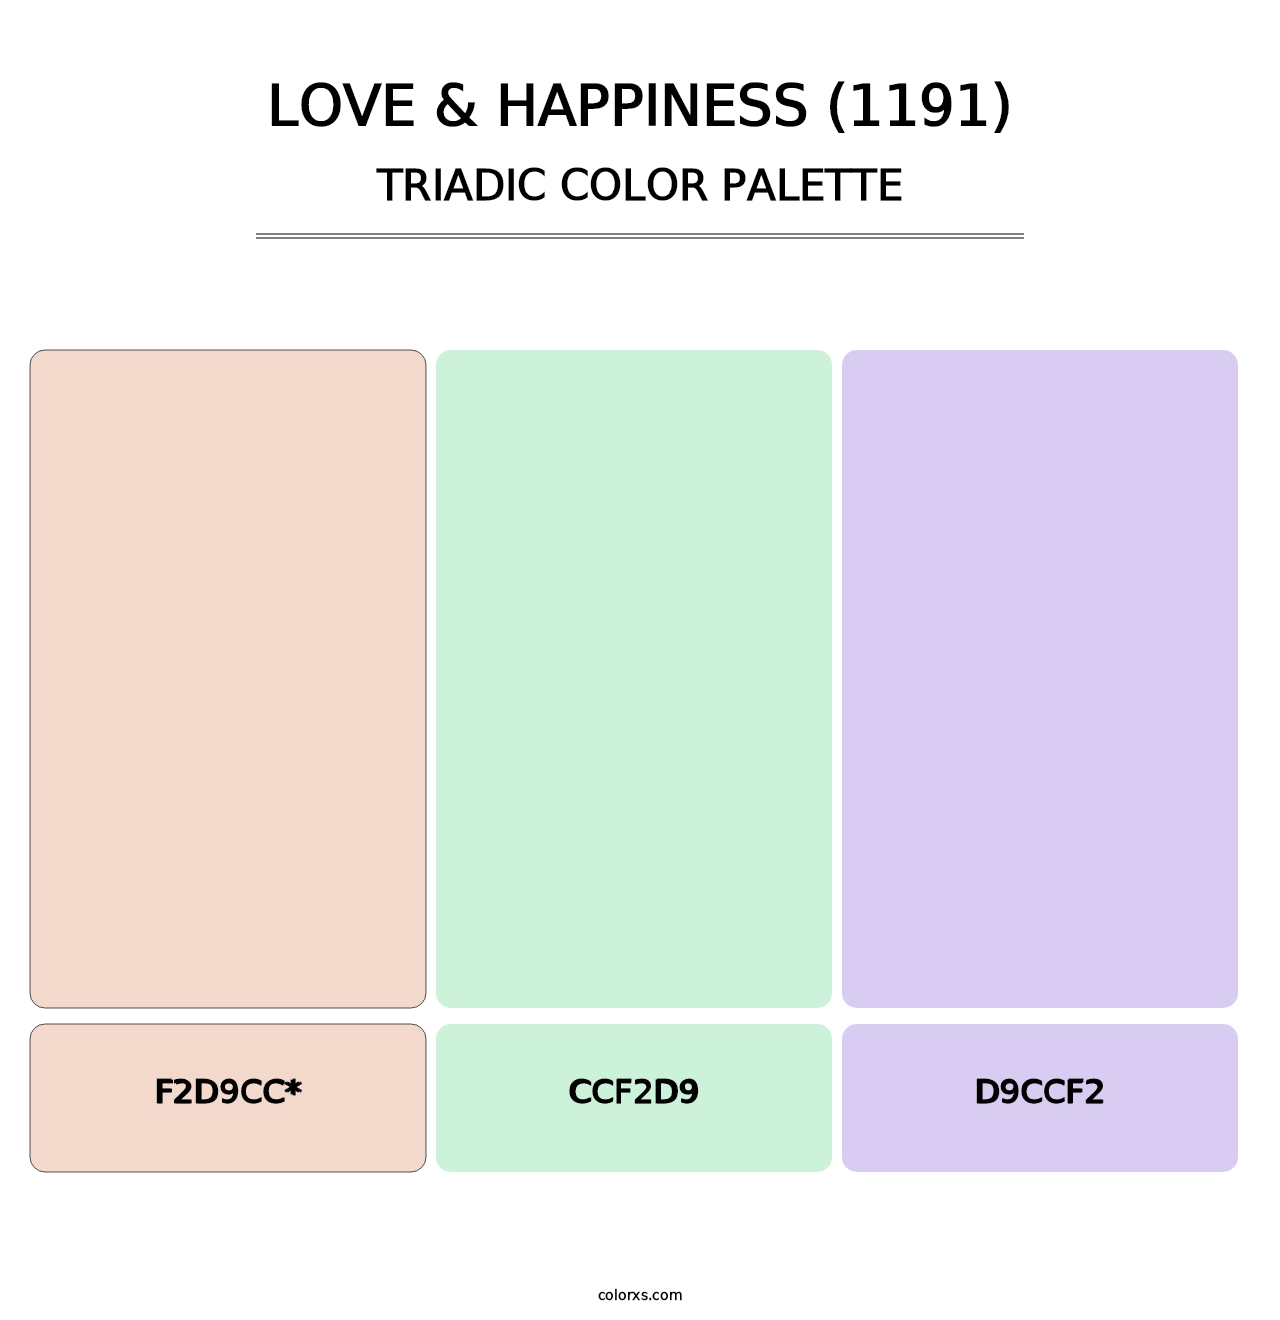 Love & Happiness (1191) - Triadic Color Palette